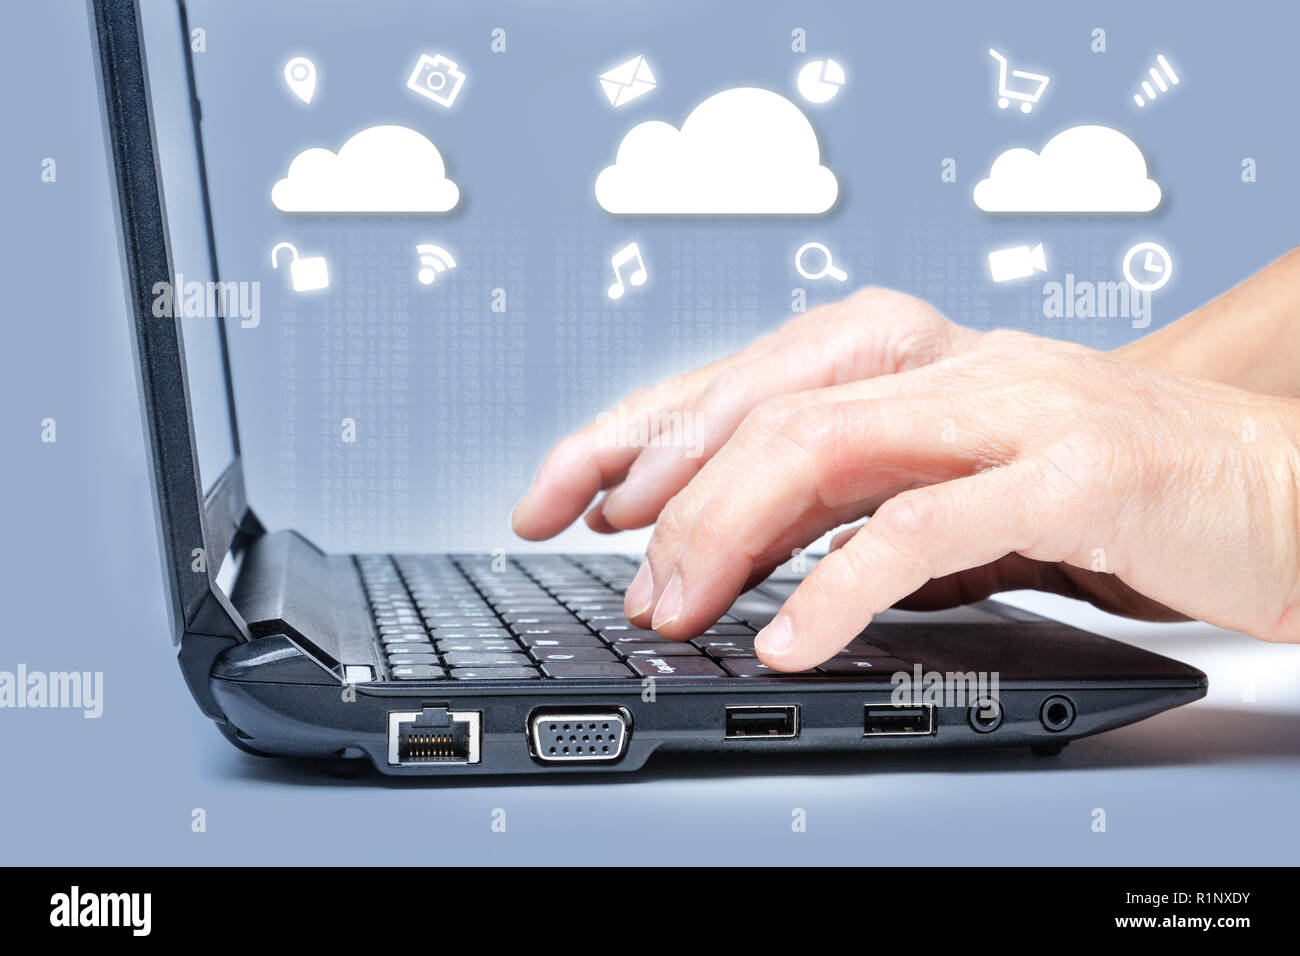 Cloud computing concept showing hands typing on computer keyboard with common Internet media icons around clouds from digital data. Stock Photo